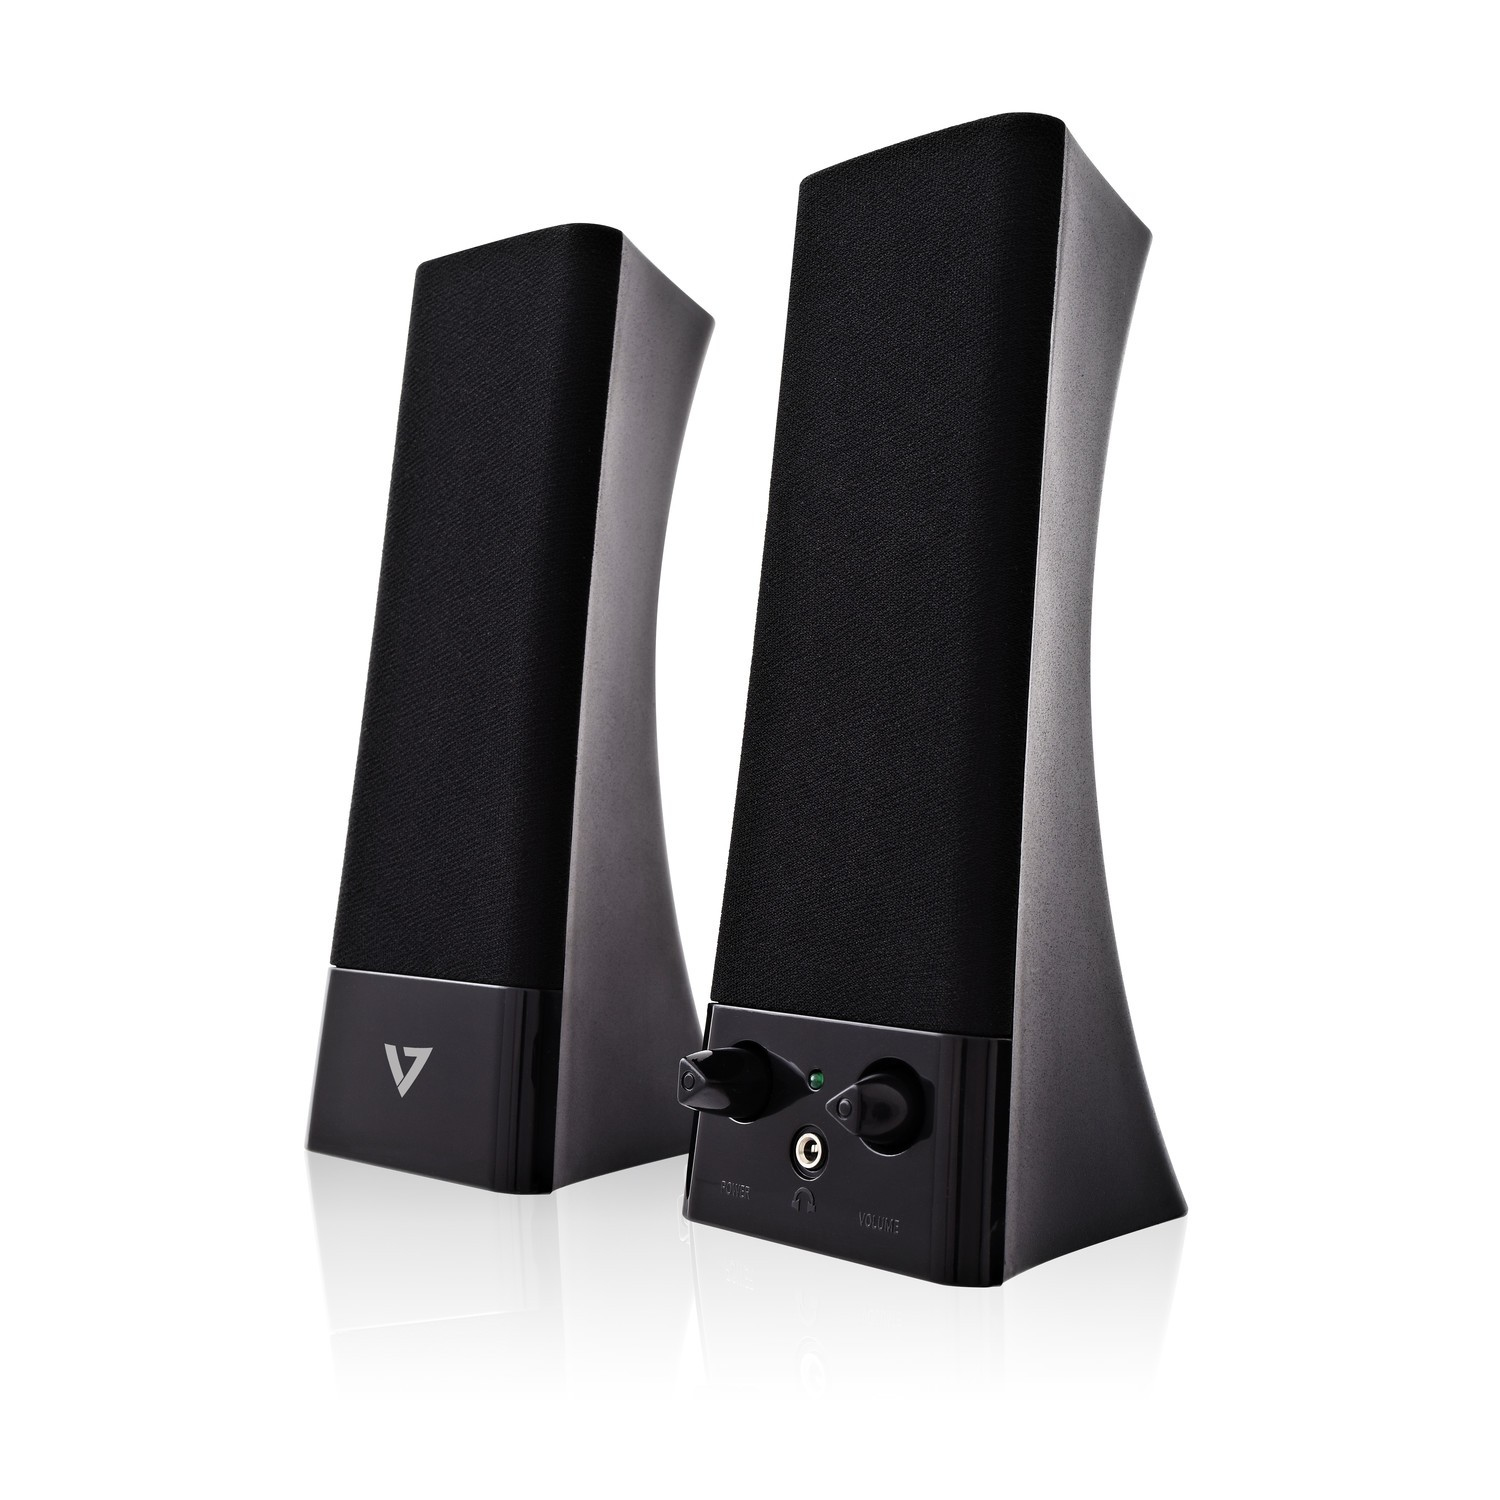 2.0 STEREO SPEAKERS USB PWR